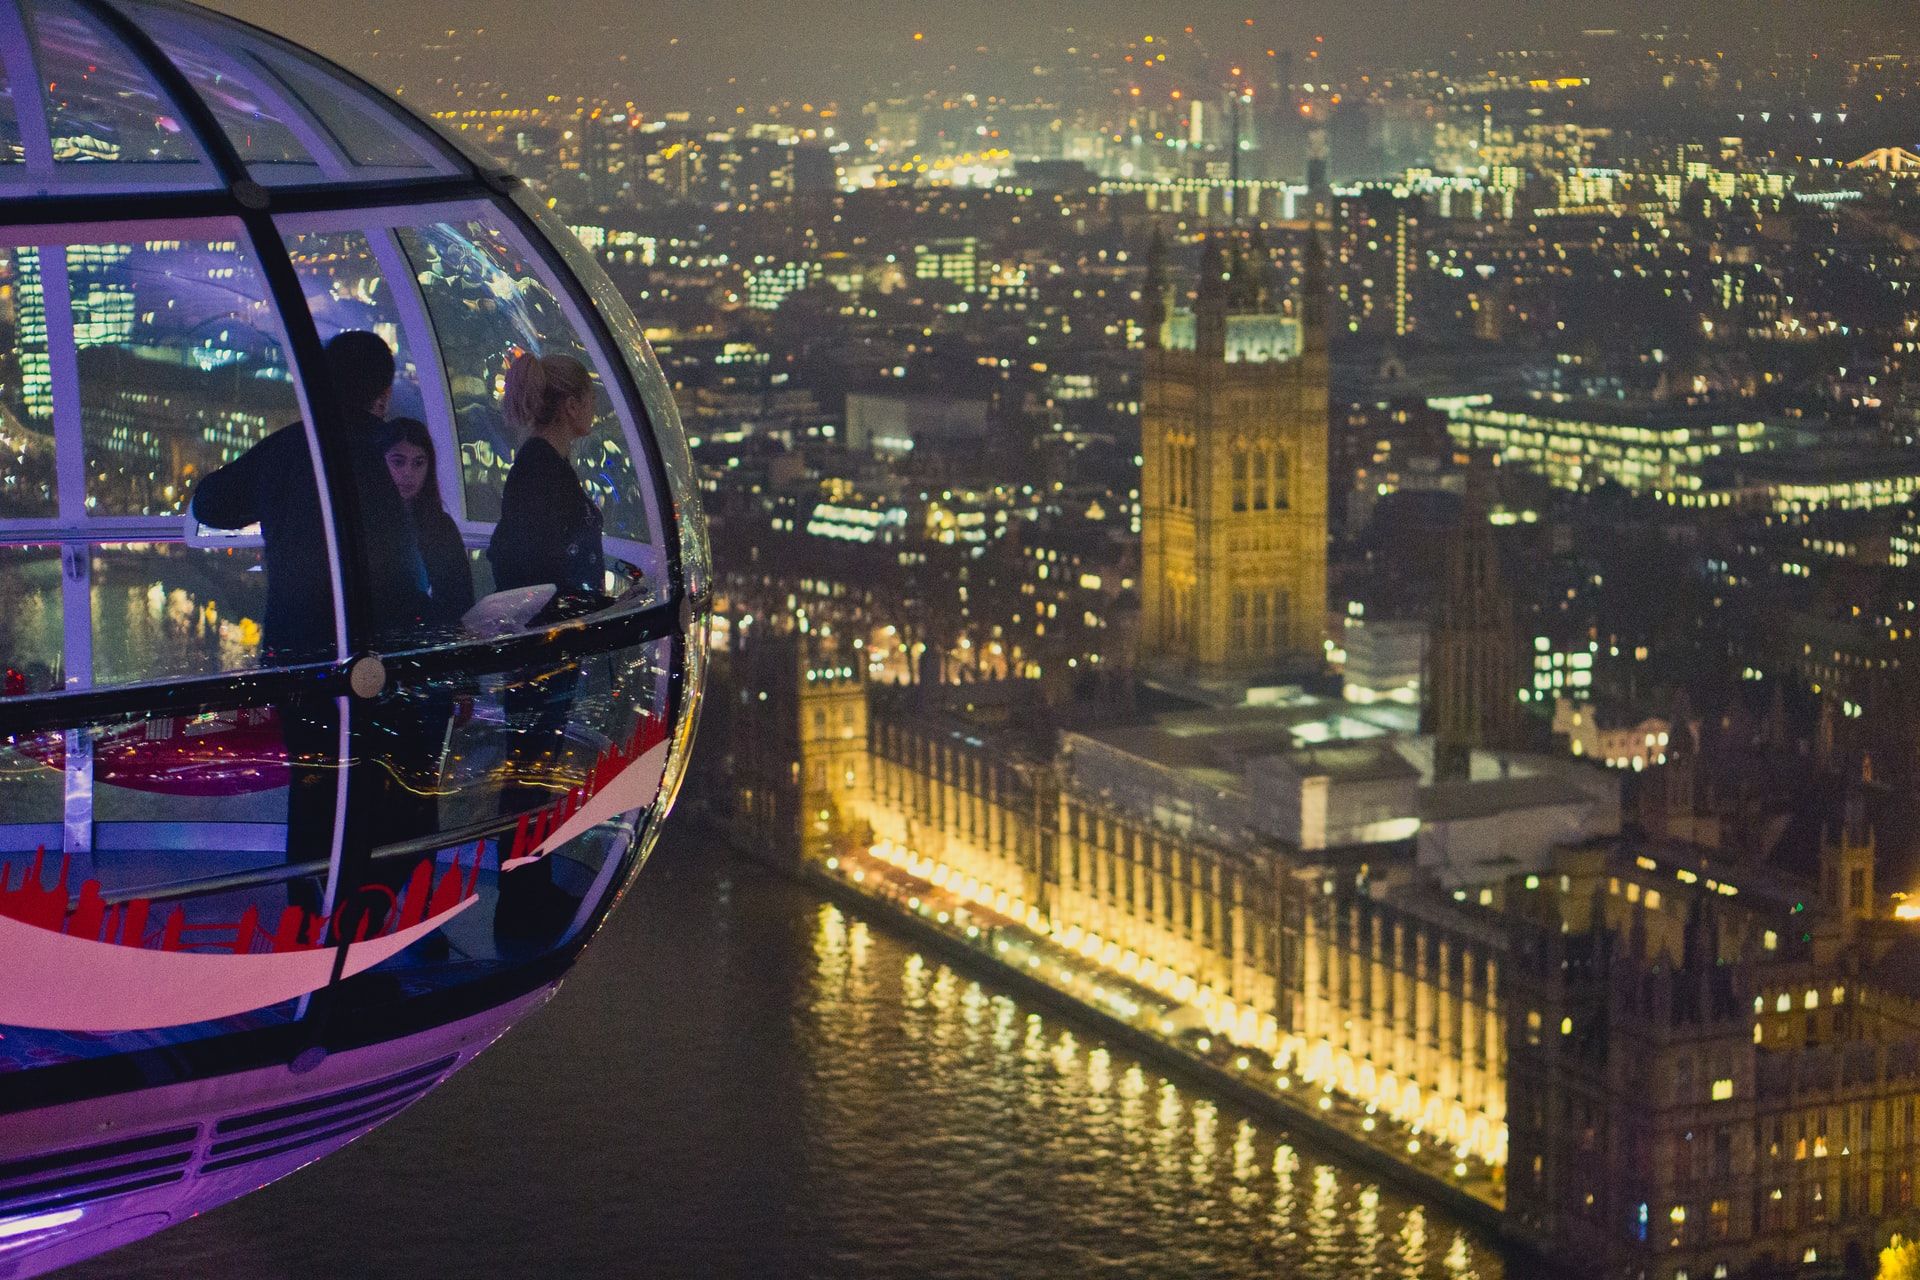 The view from the London Eye is spectacular